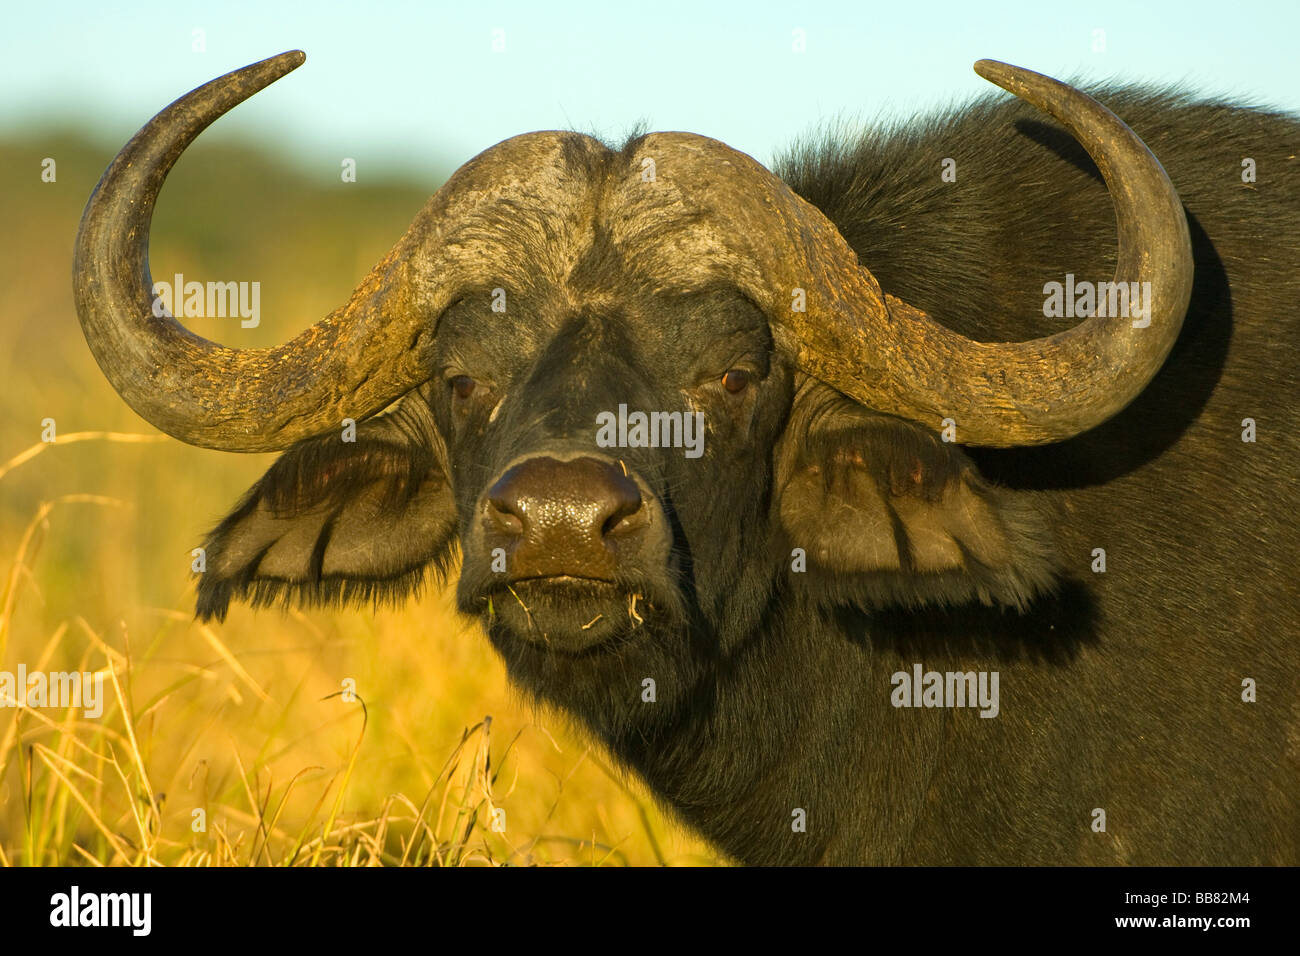 African Buffalo (Syncerus caffer) nell'ultimo giorno, ritratto, Chobe National Park, Botswana, Africa Foto Stock